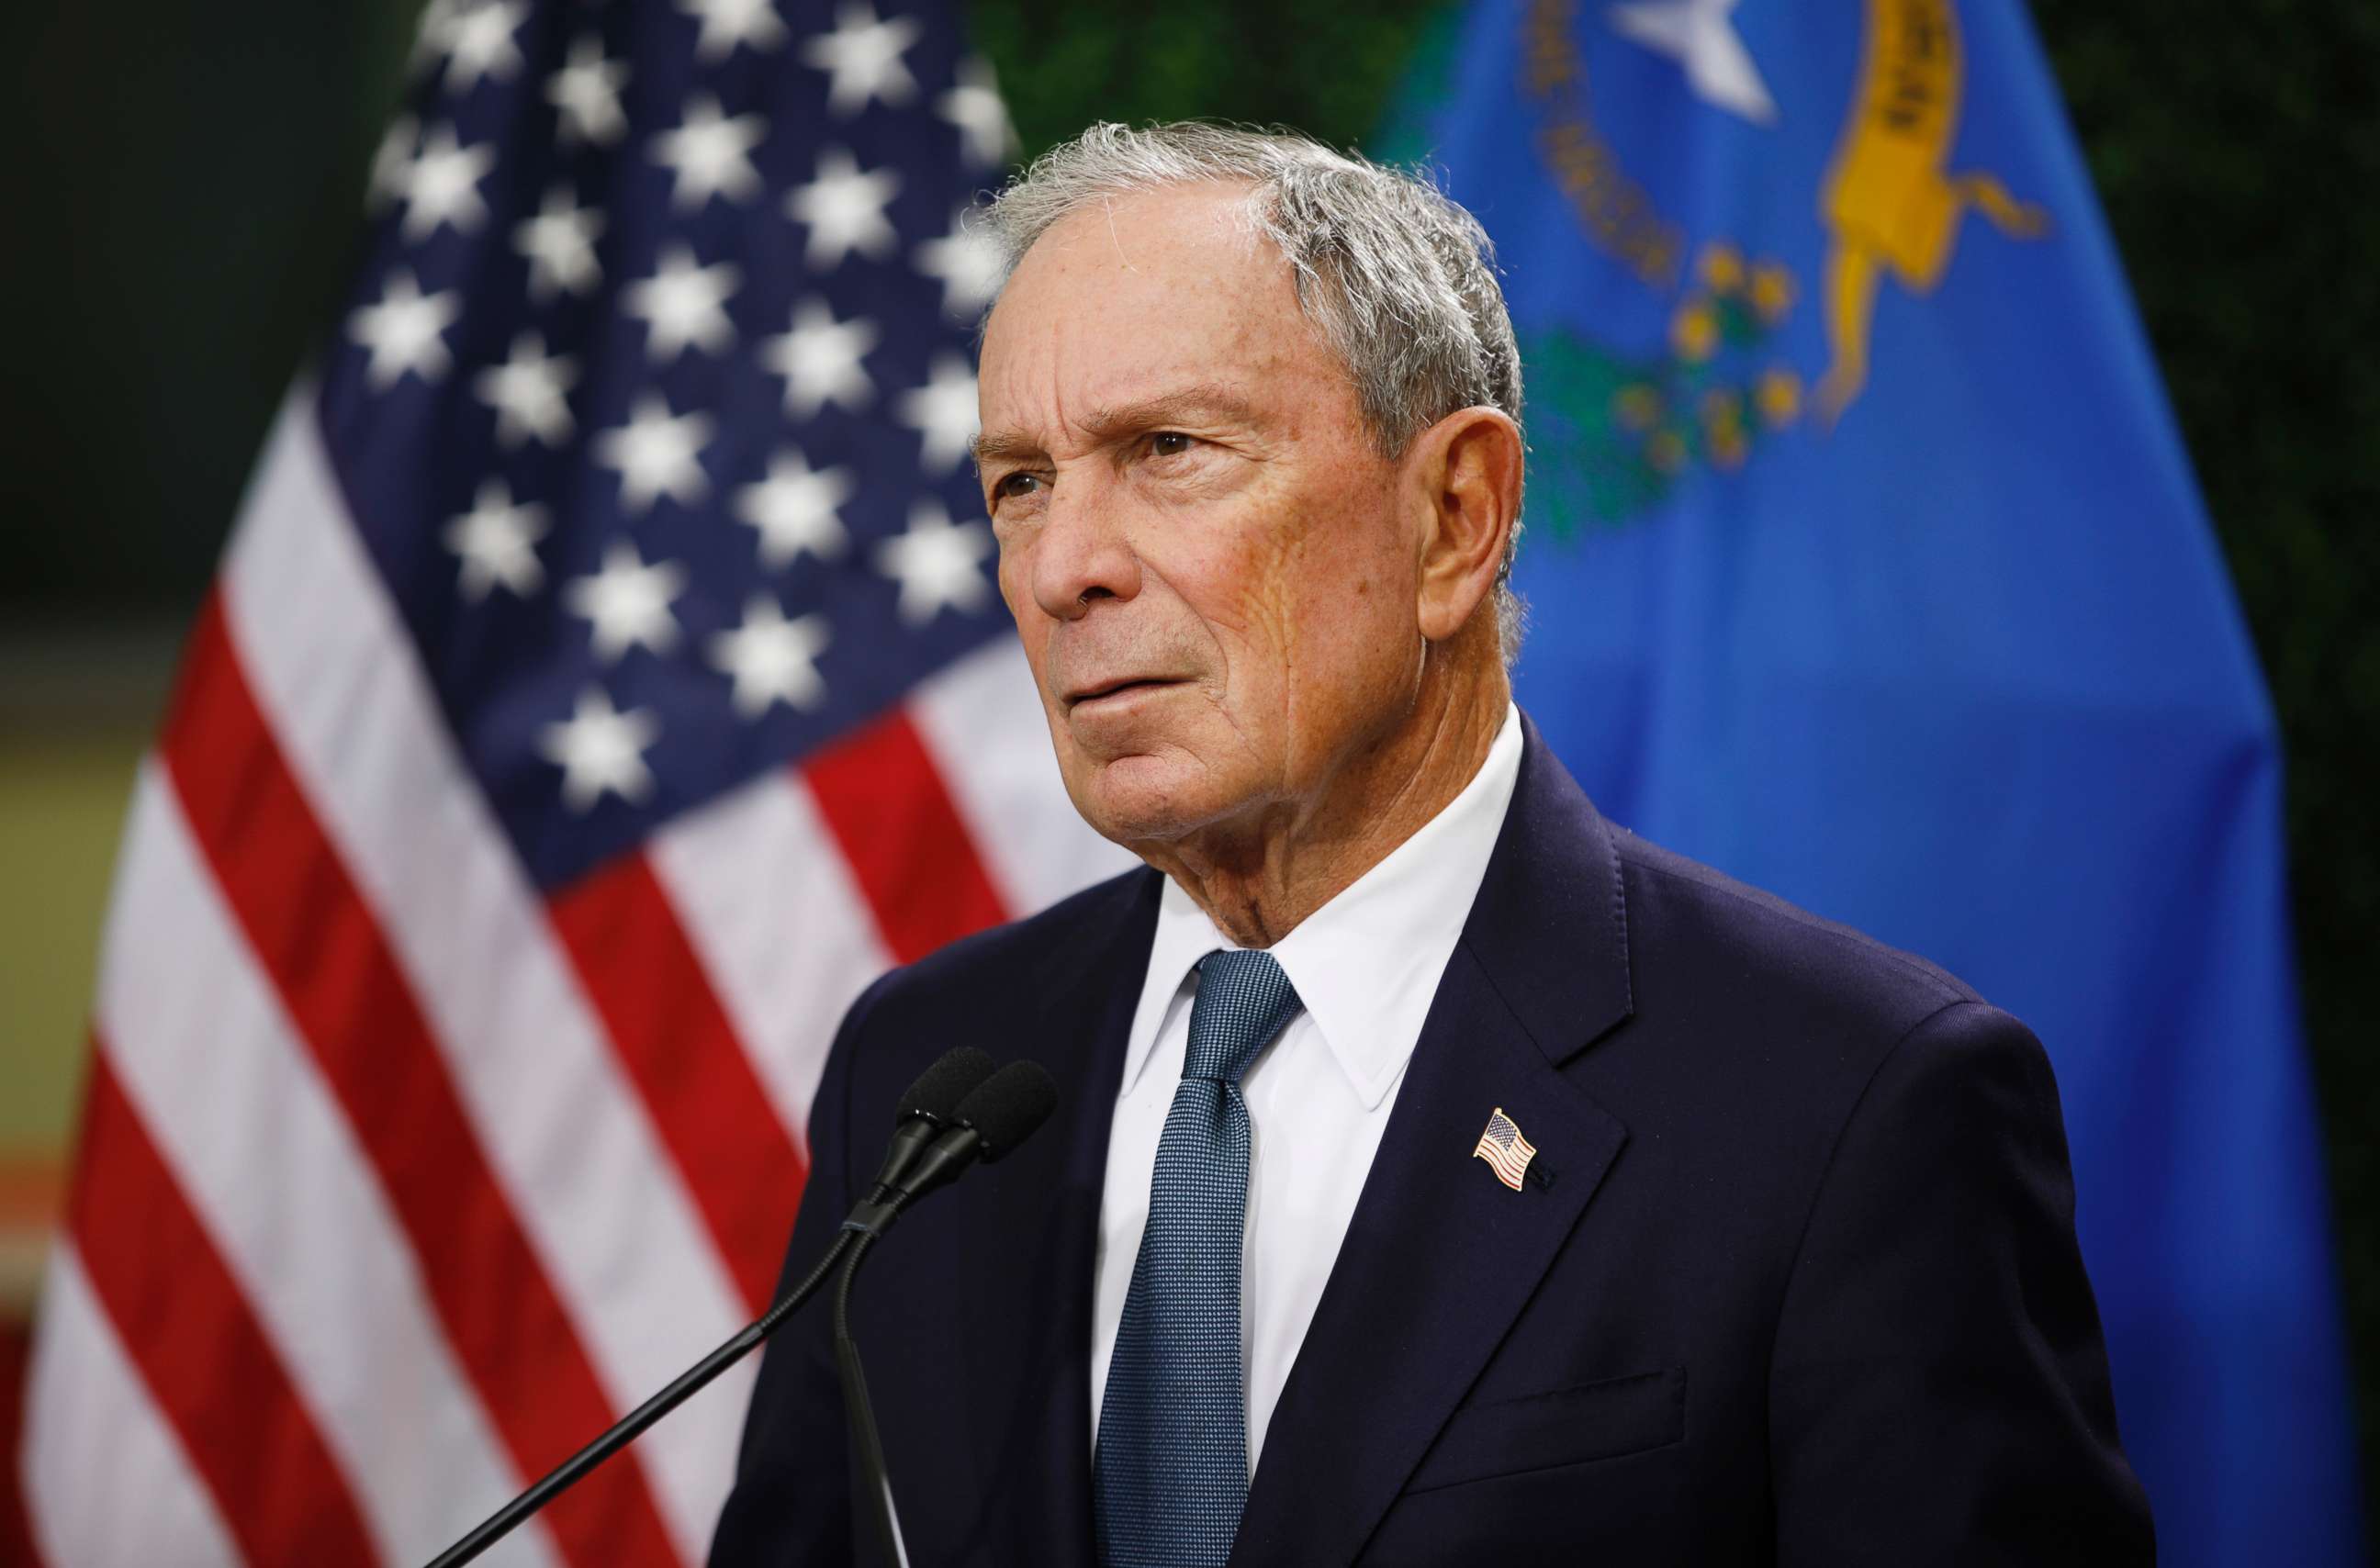 PHOTO: Former New York City mayor Michael Bloomberg speaks at a news conference at a gun control advocacy event, Feb. 26, 2019, in Las Vegas.